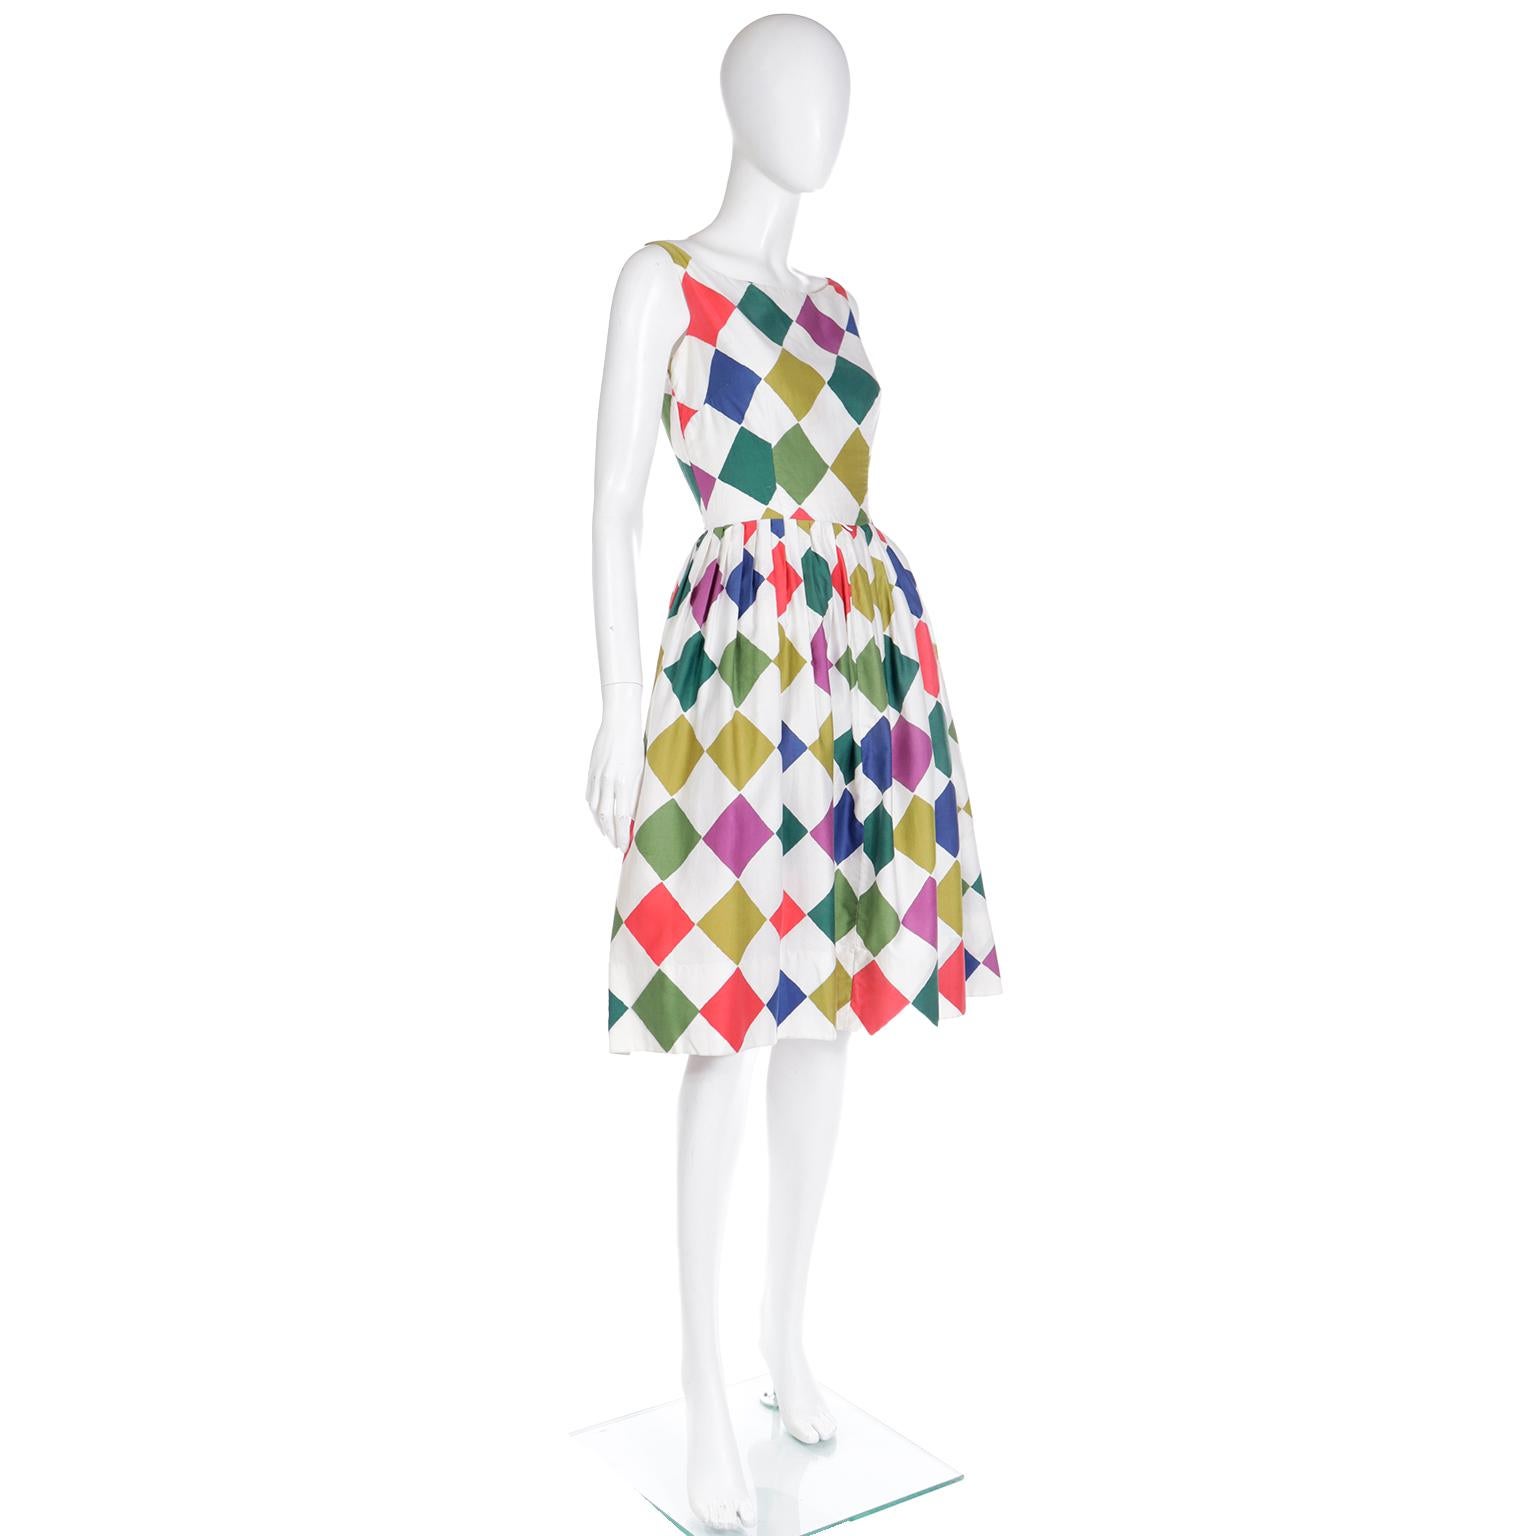 Vintage 1960s Colorful Harlequin Diamond Print Summer Dress In Excellent Condition For Sale In Portland, OR